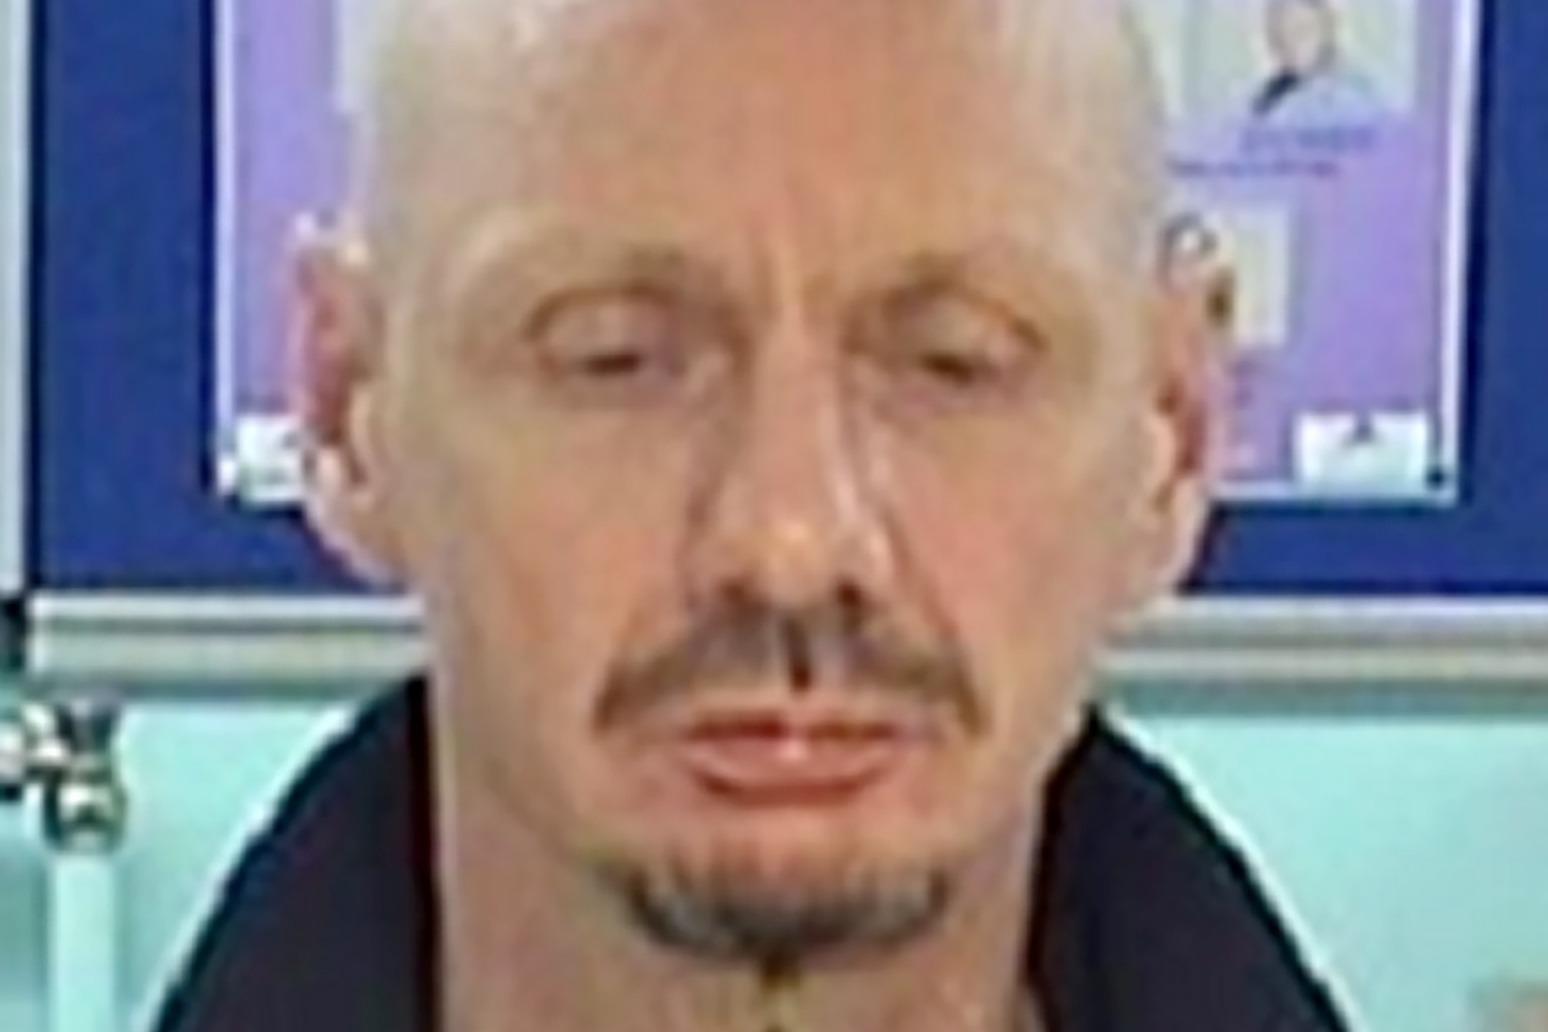 Manhunt launched for sex offender who ‘presents danger’ to women and children 